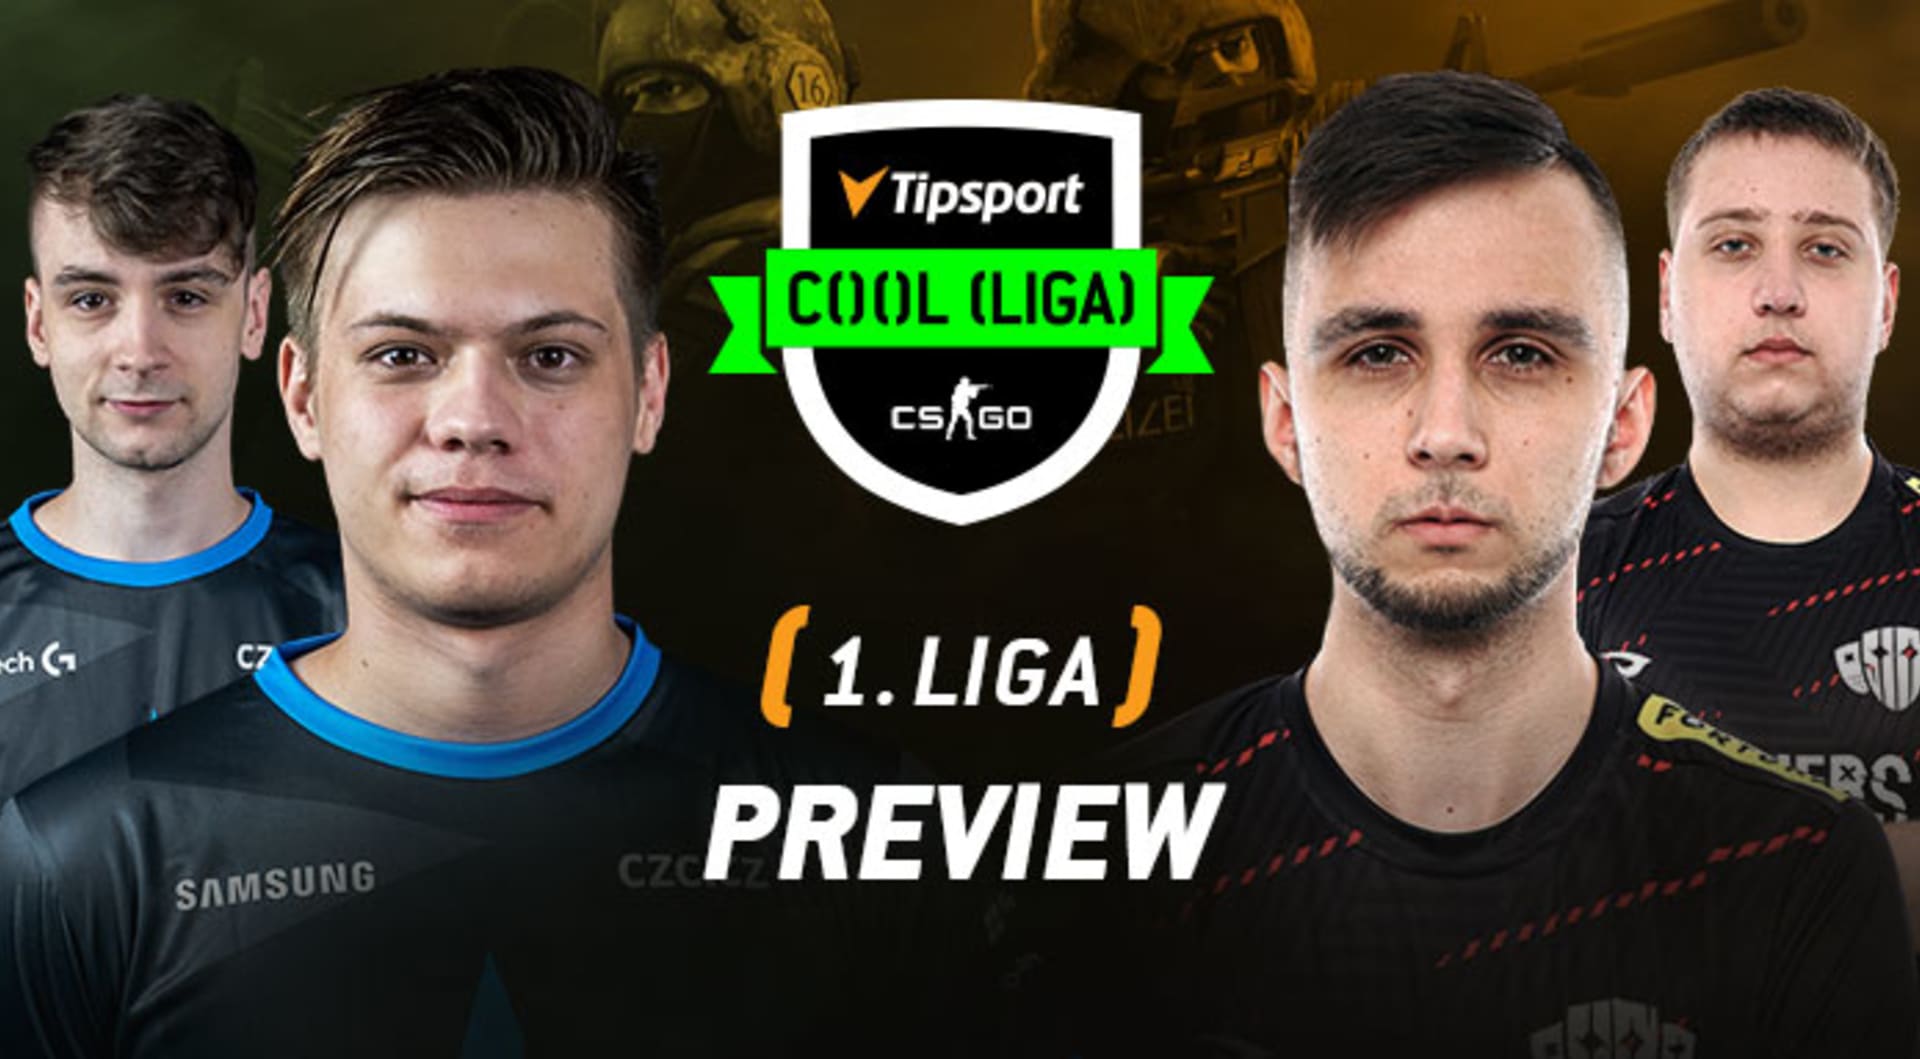 1. Tipsport COOL liga, preview finále